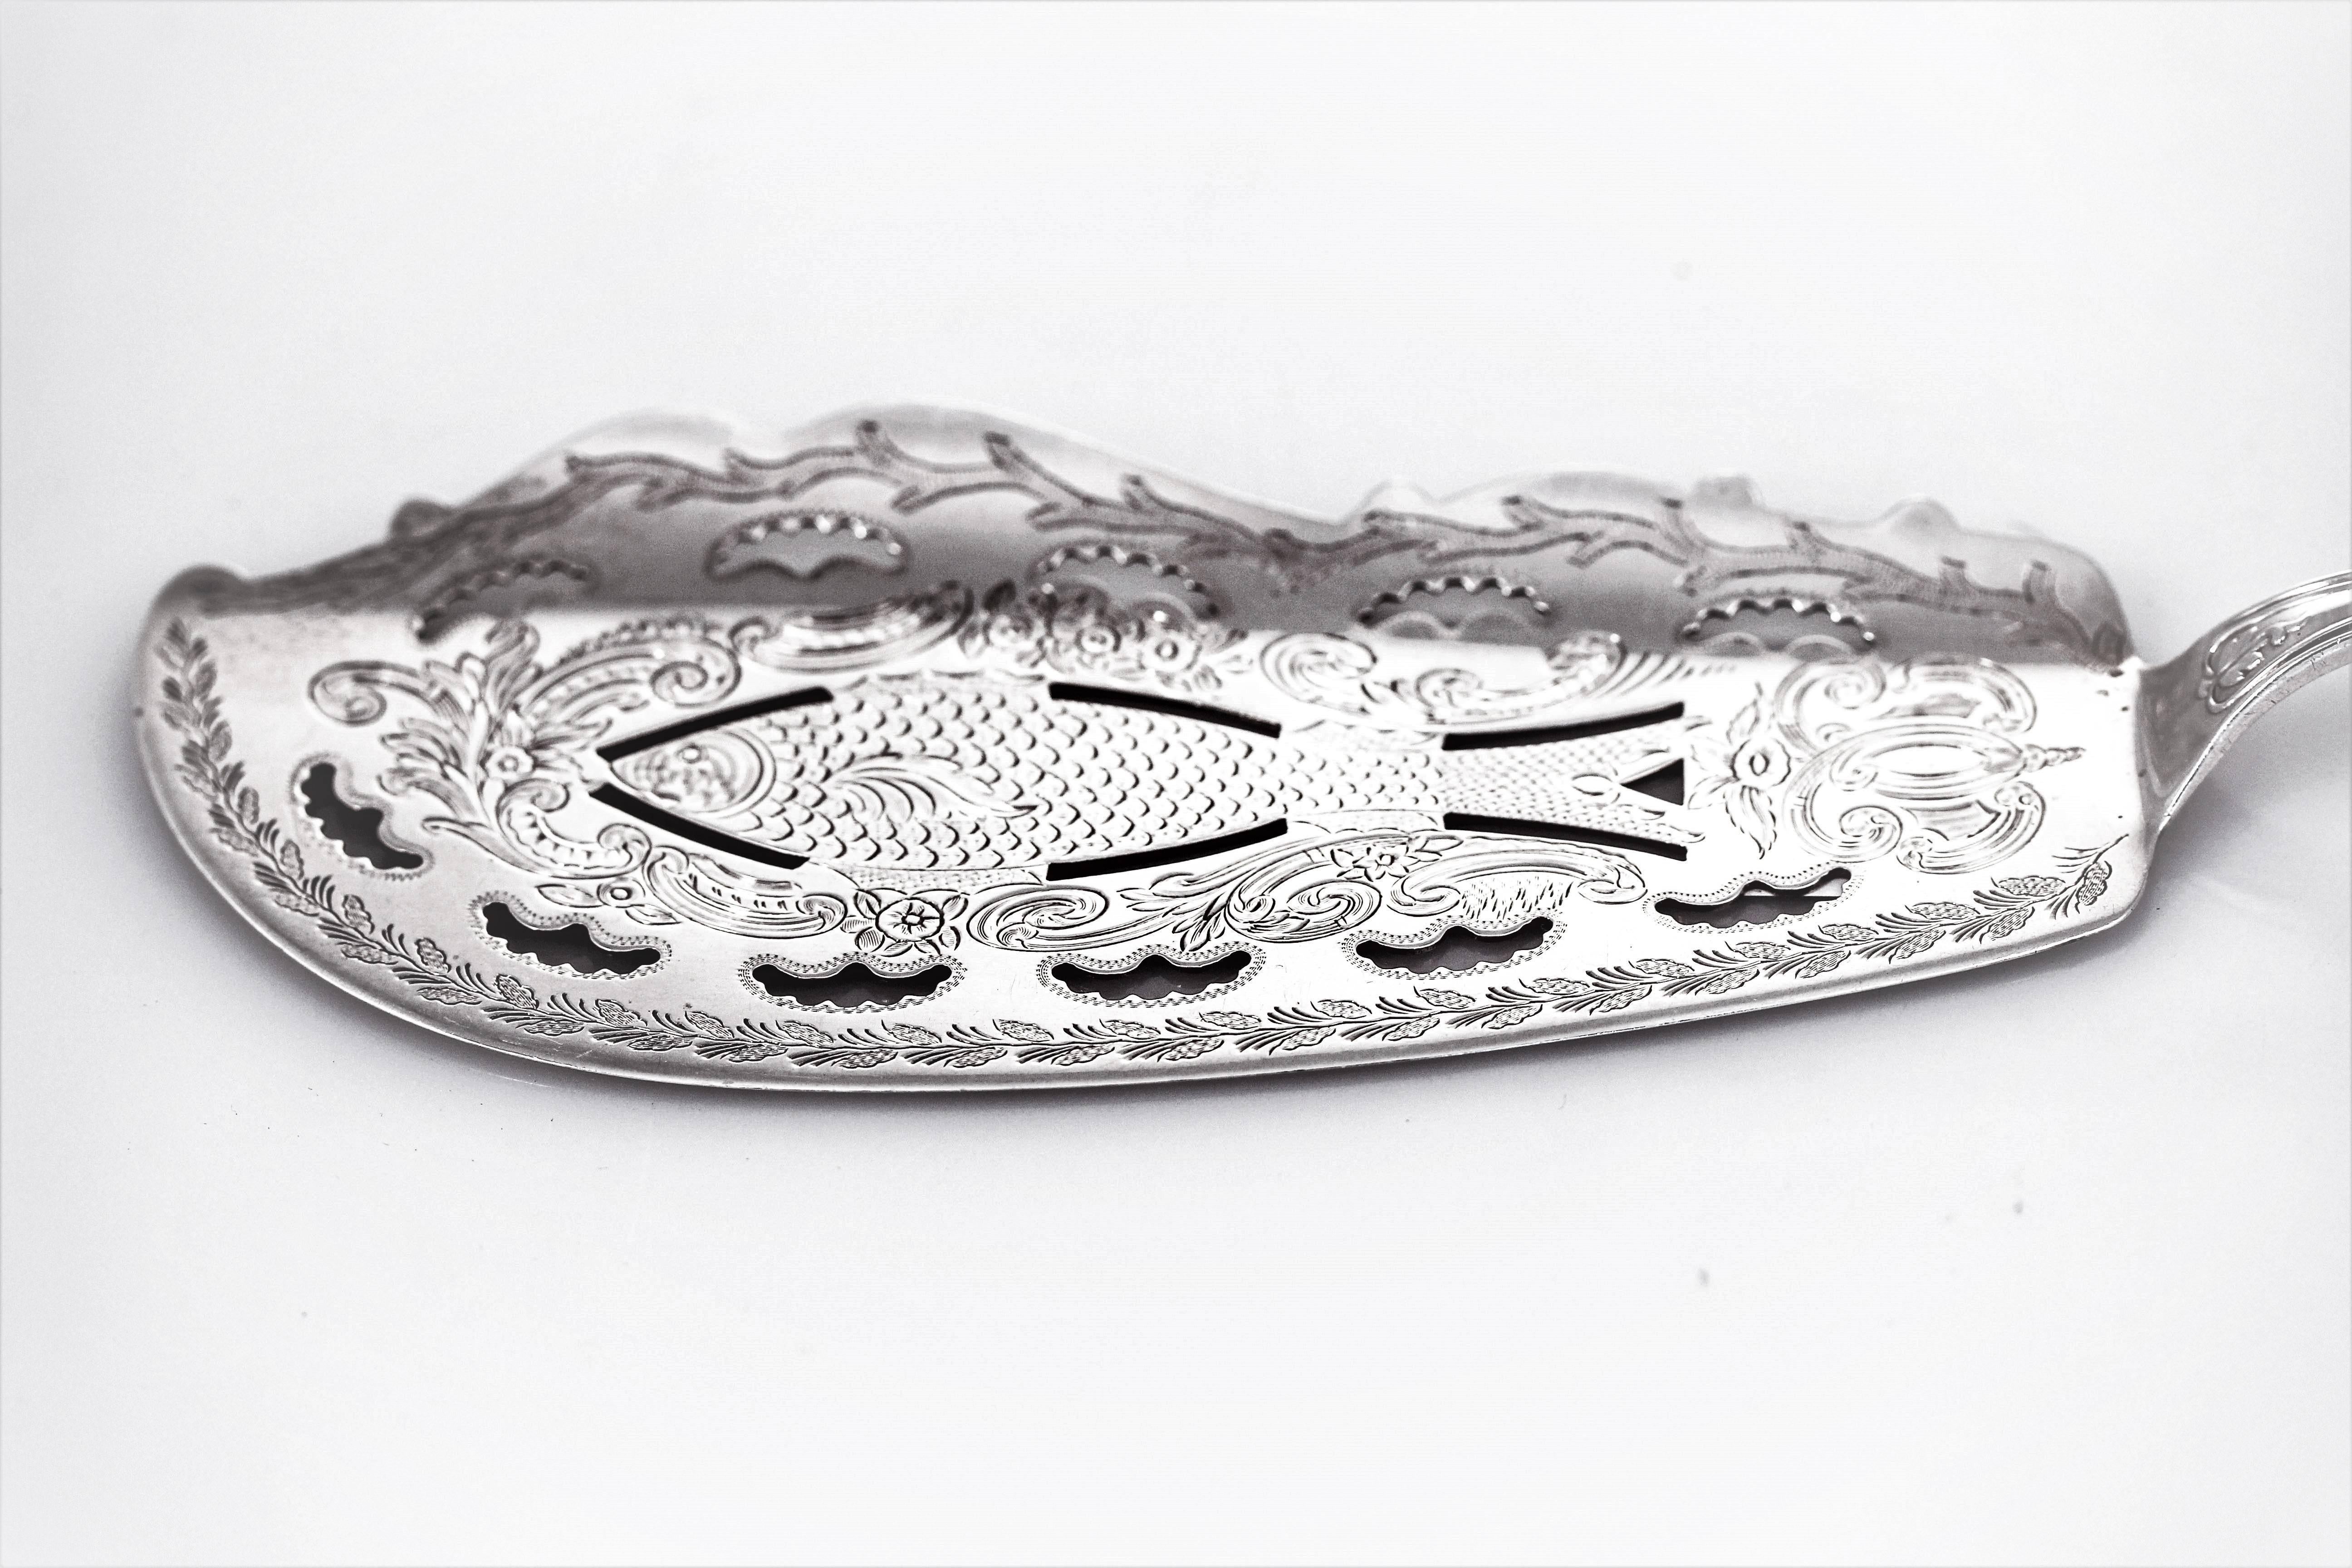 The fish server is just exquisite, a work of art! One side is smooth and rounded while the other is scalloped and slightly raised. In the center a fish with scales appears to be swimming. The cutout beneath and above represents the sea. Throughout,